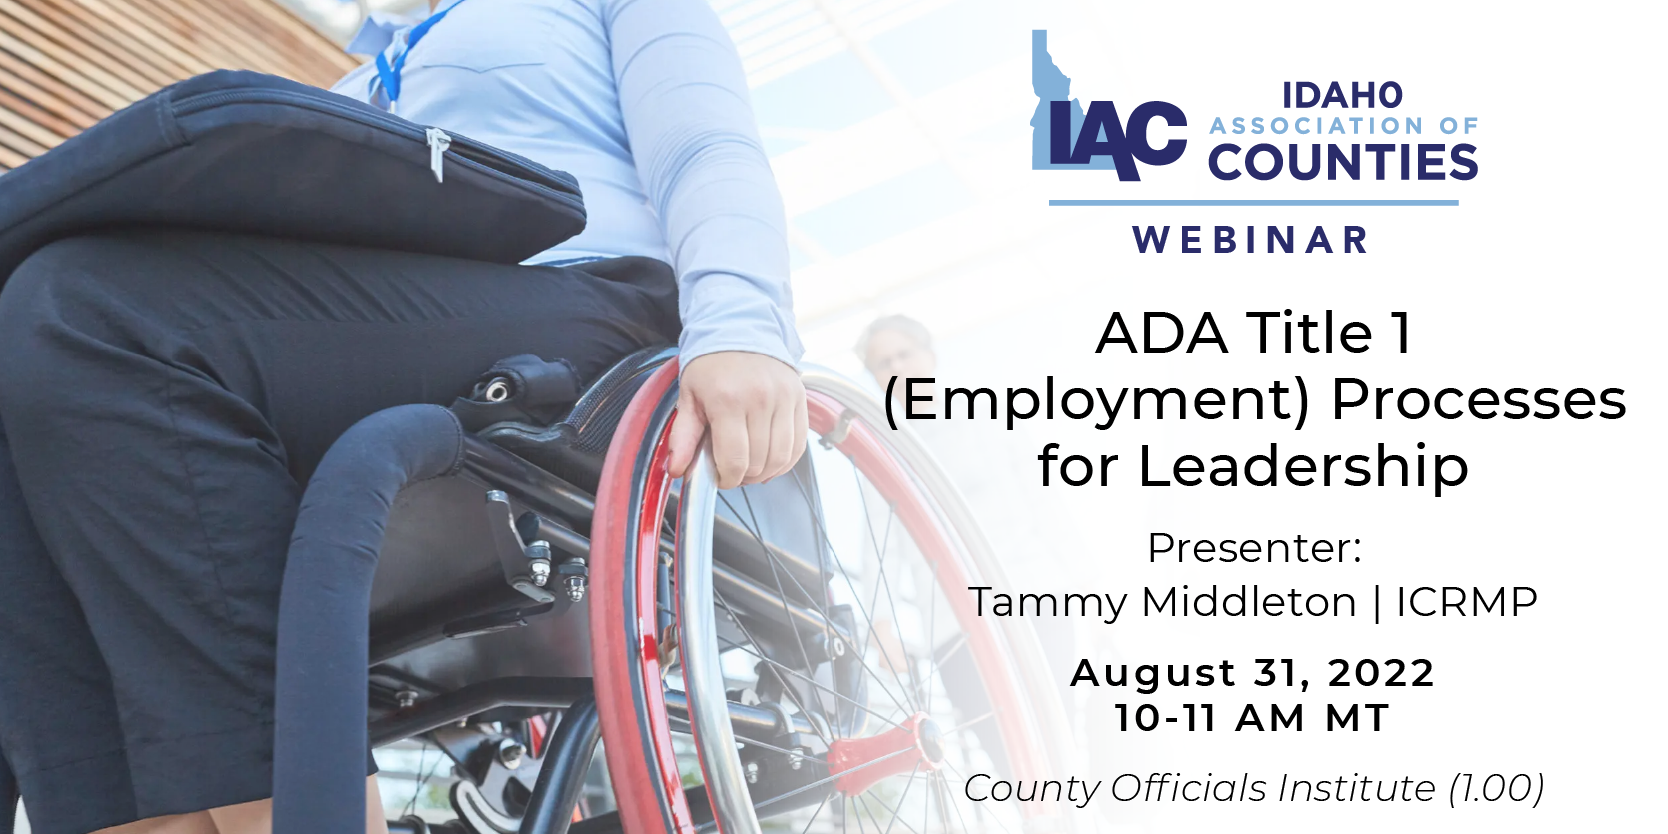 ADA Title 1 (Employment) Processes for Leadership